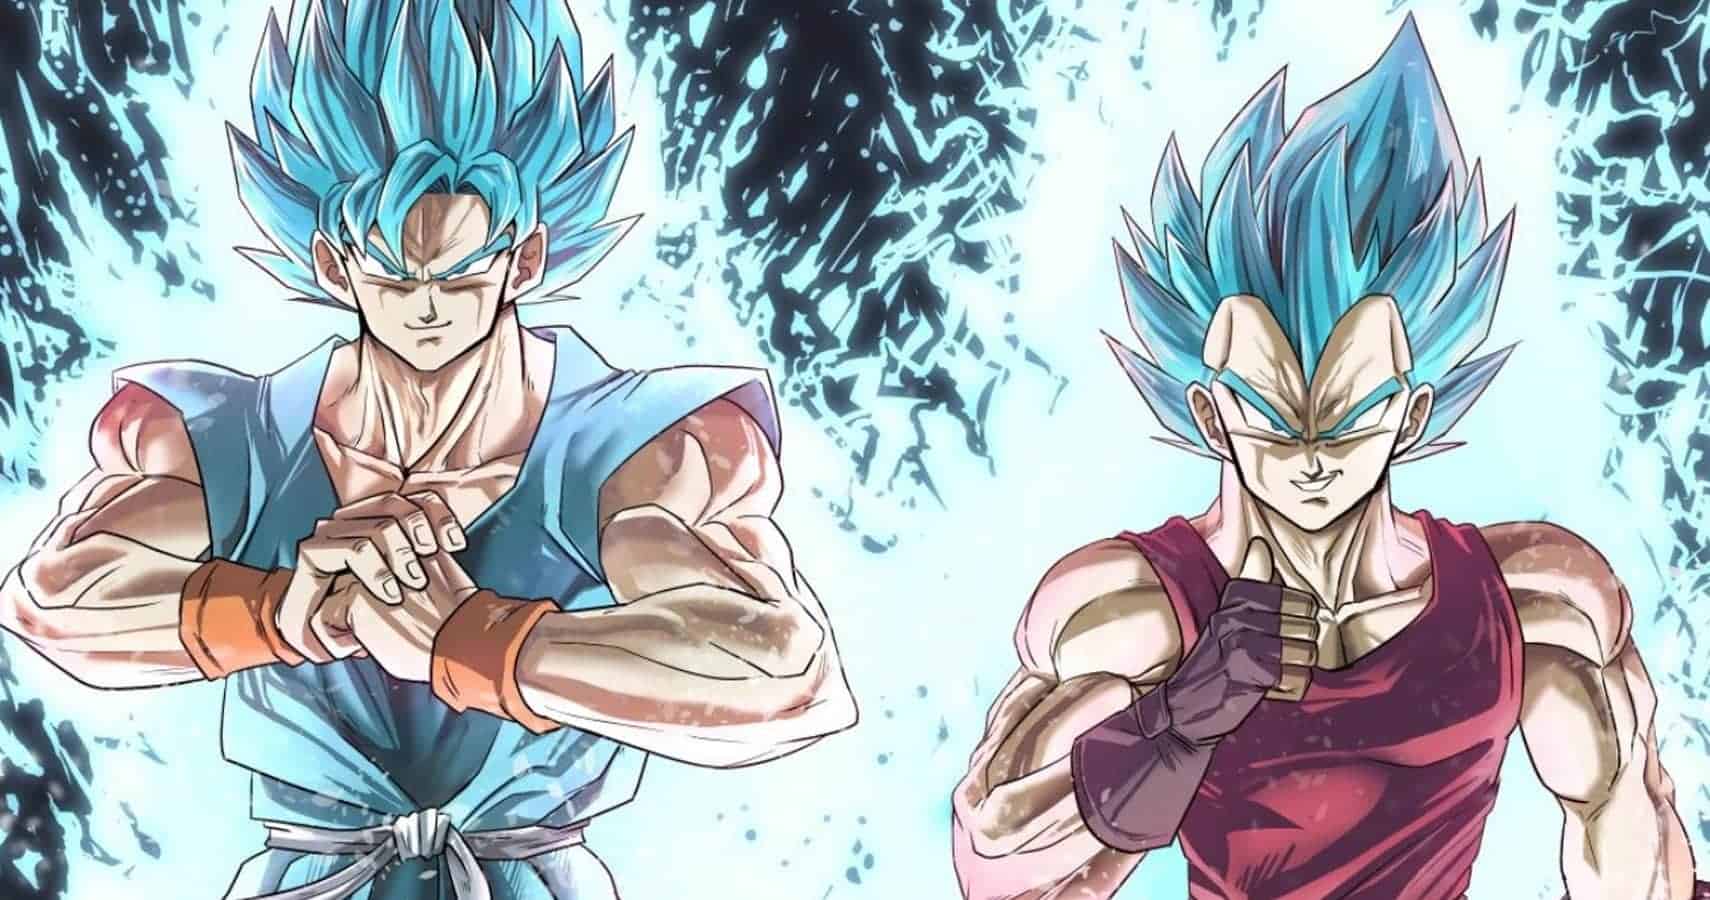 did Goku feel sorry for Vegeta for never being able to awaken Super